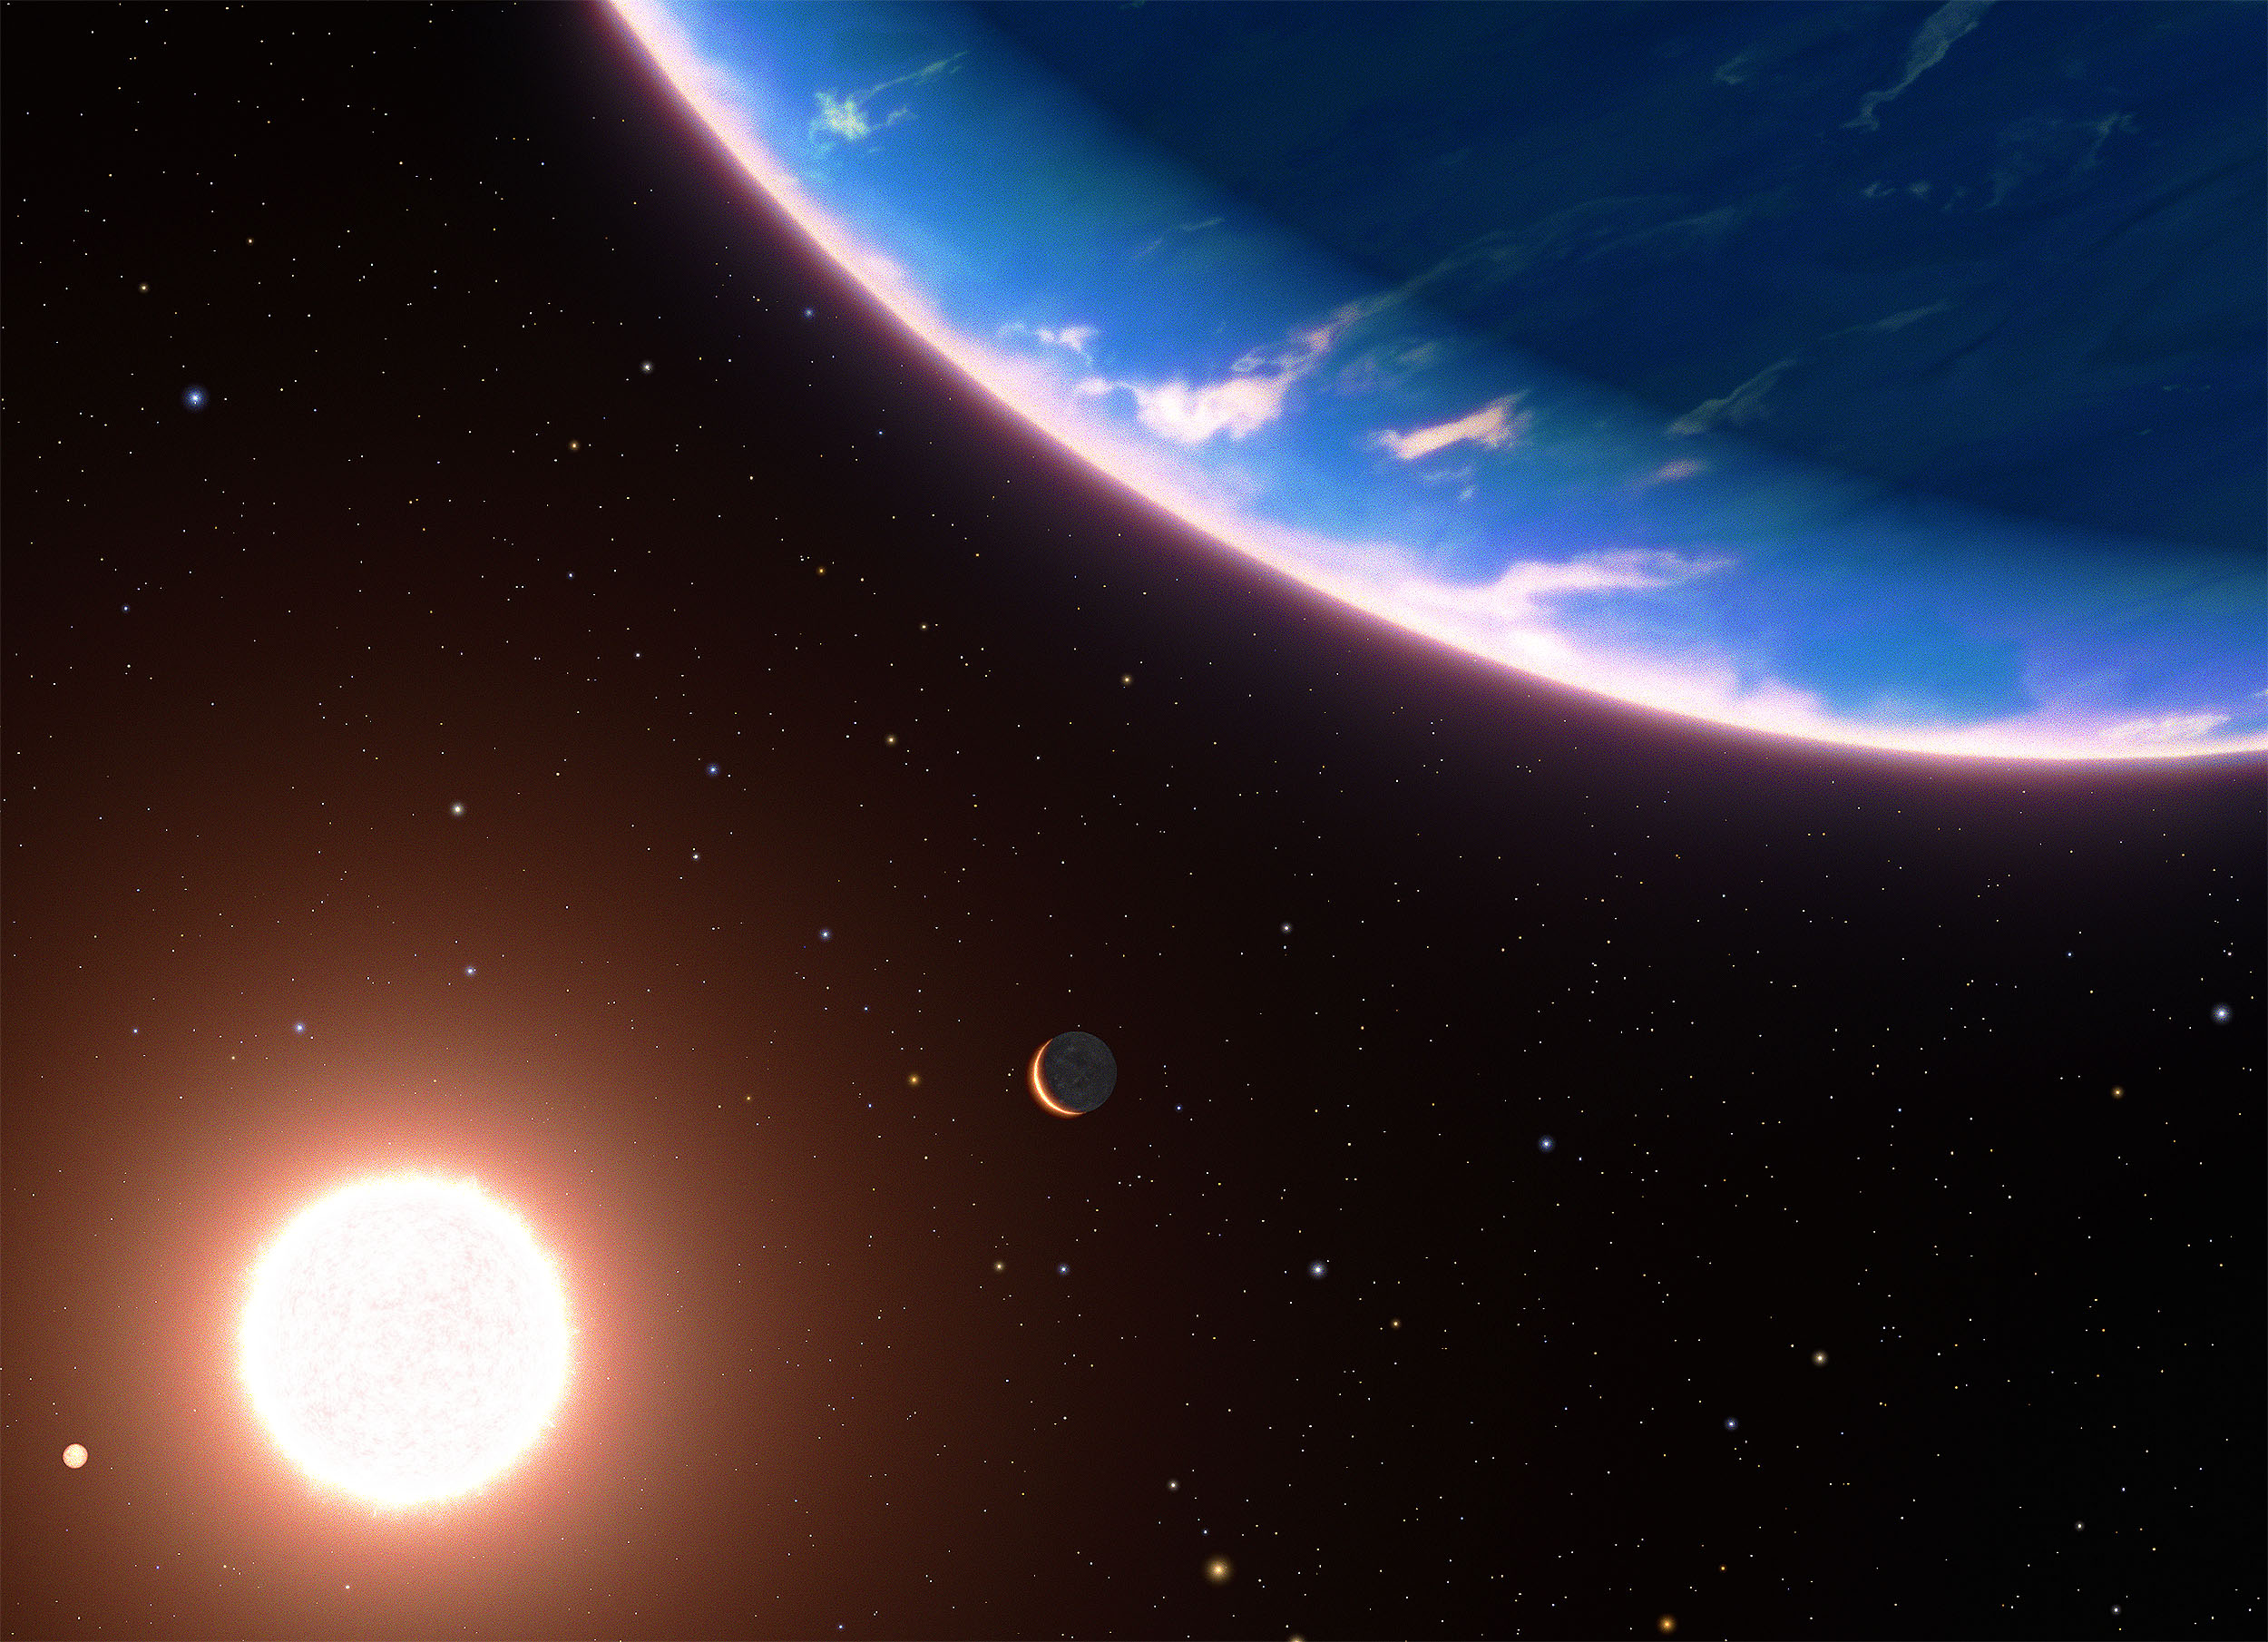 An illustration of the water-rich exoplanet close to the sun